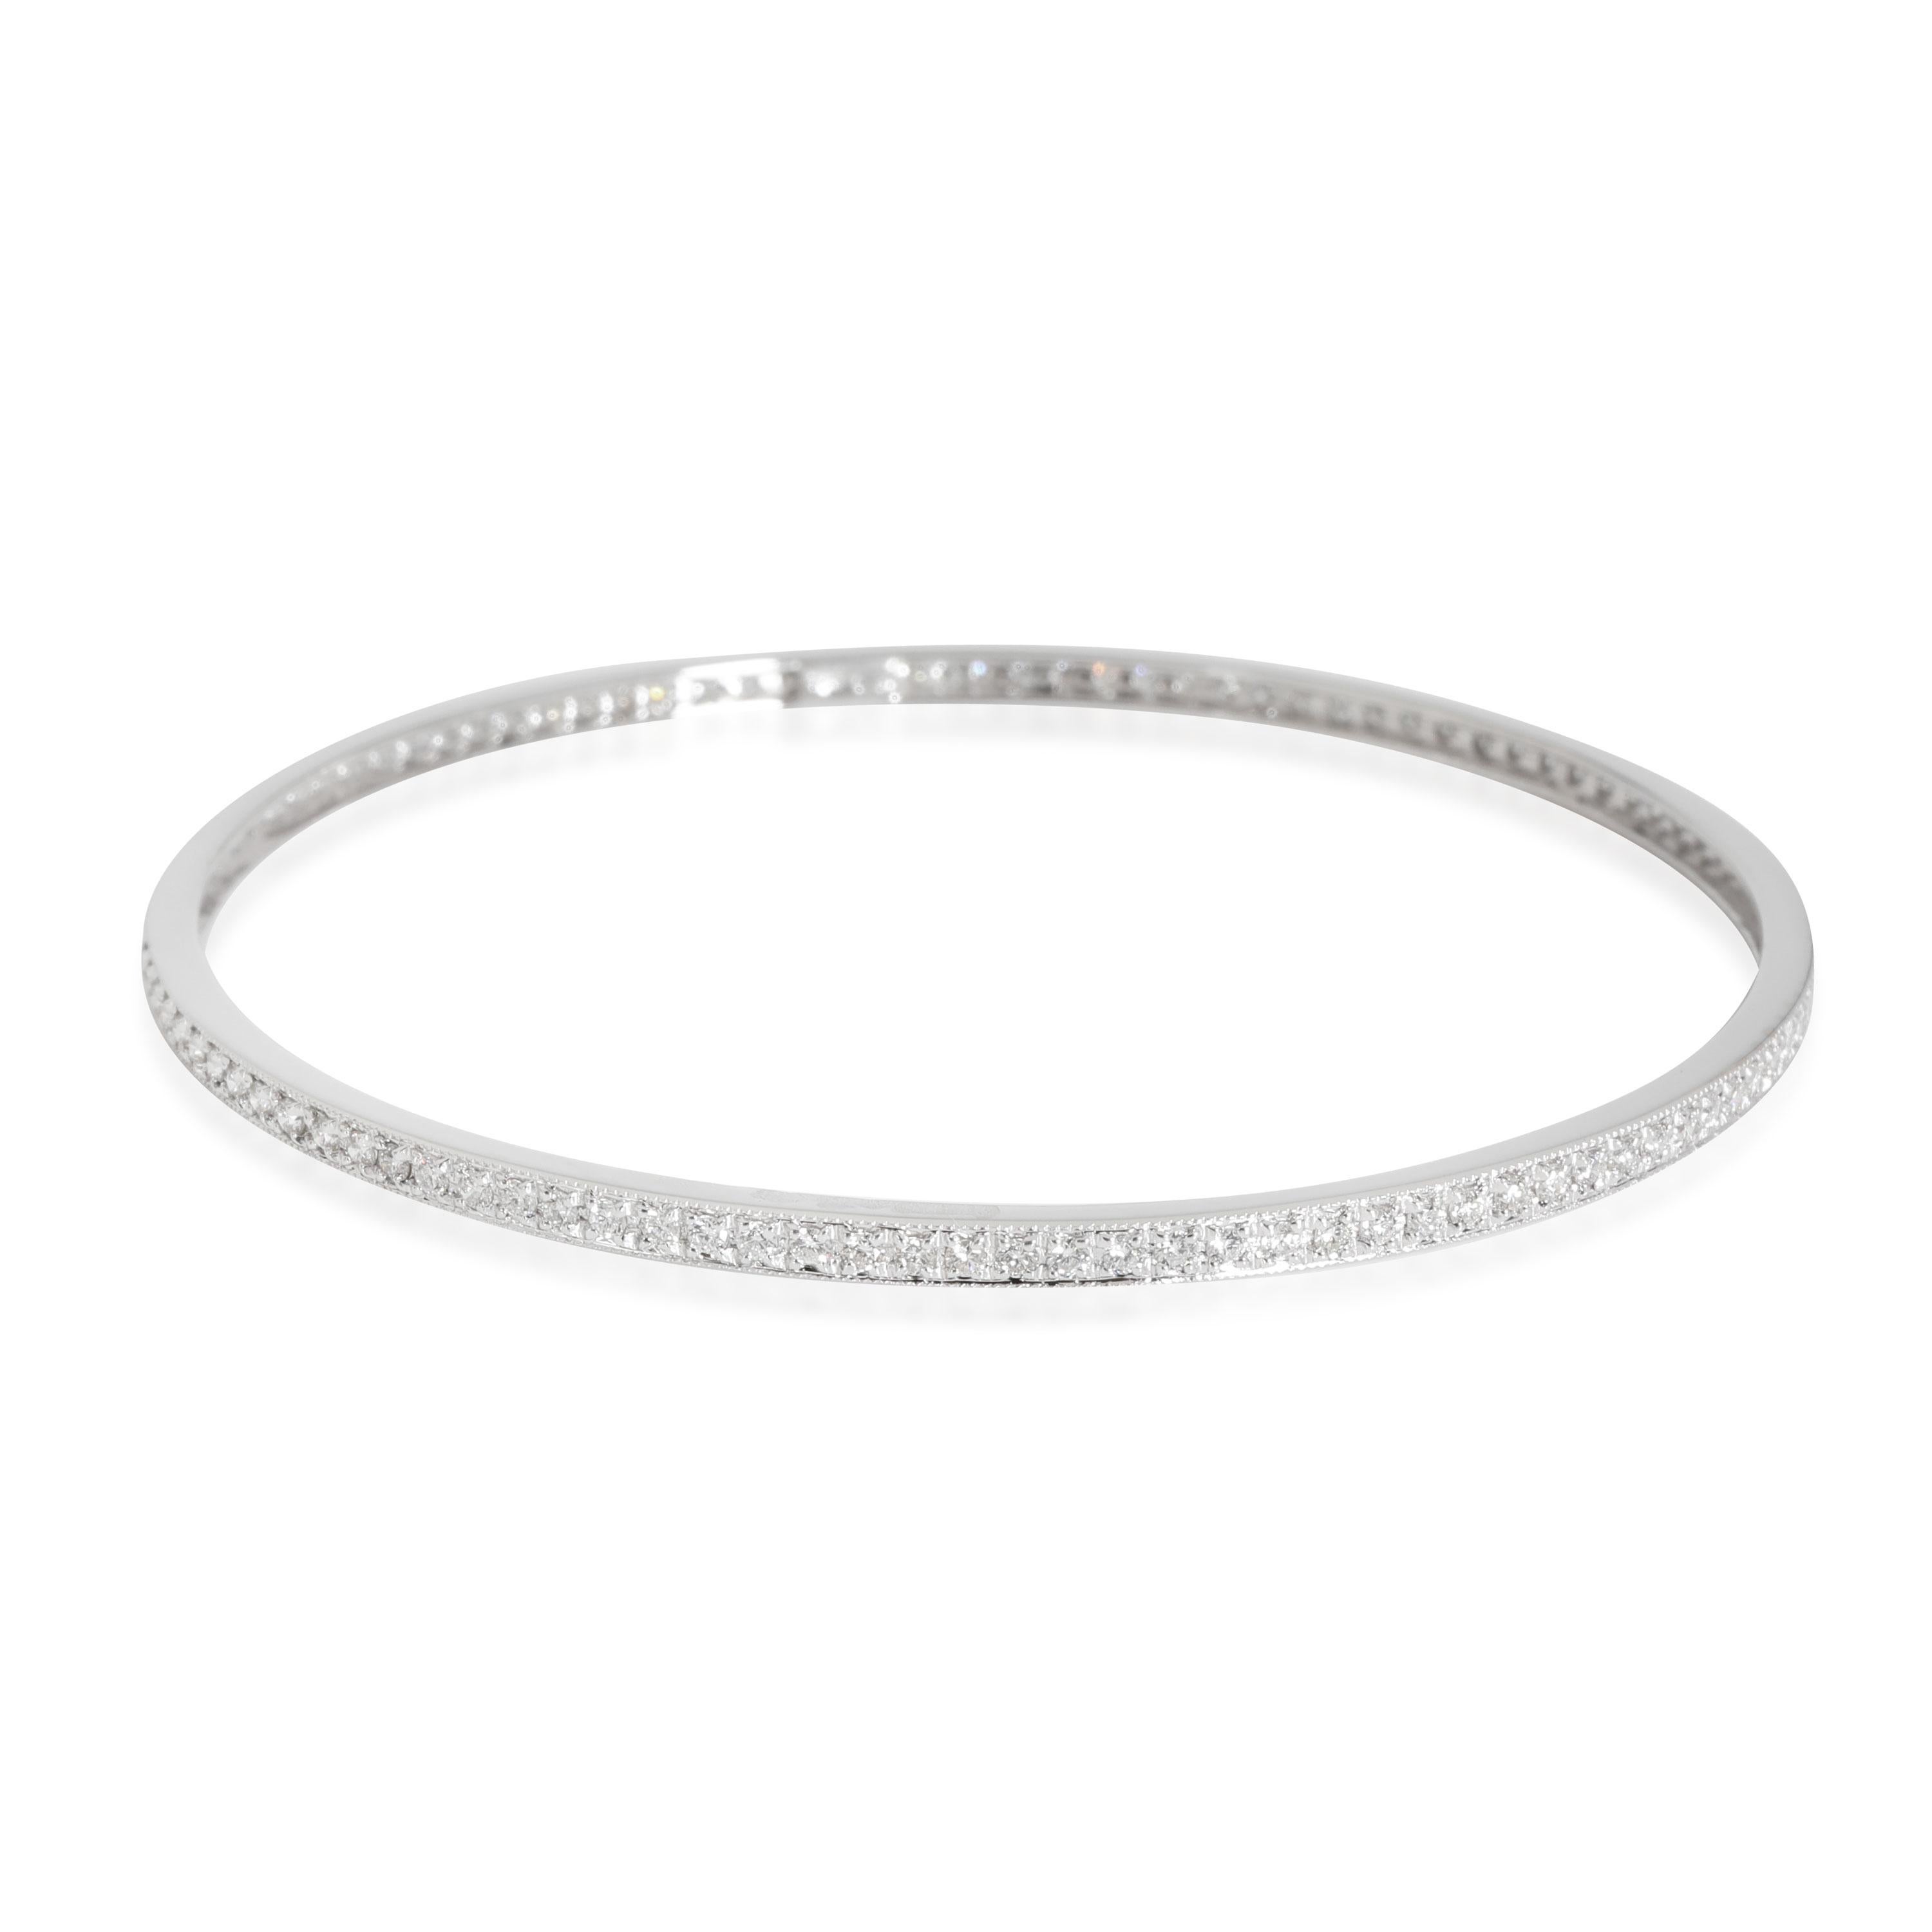 Diamond Slip On Bangle in 18k White Gold 1.75 CTW

PRIMARY DETAILS
SKU: 117279
Listing Title: Diamond Slip On Bangle in 18k White Gold 1.75 CTW
Condition Description: Retails for 2995 USD. In excellent condition and recently polished. Fits an 8 inch